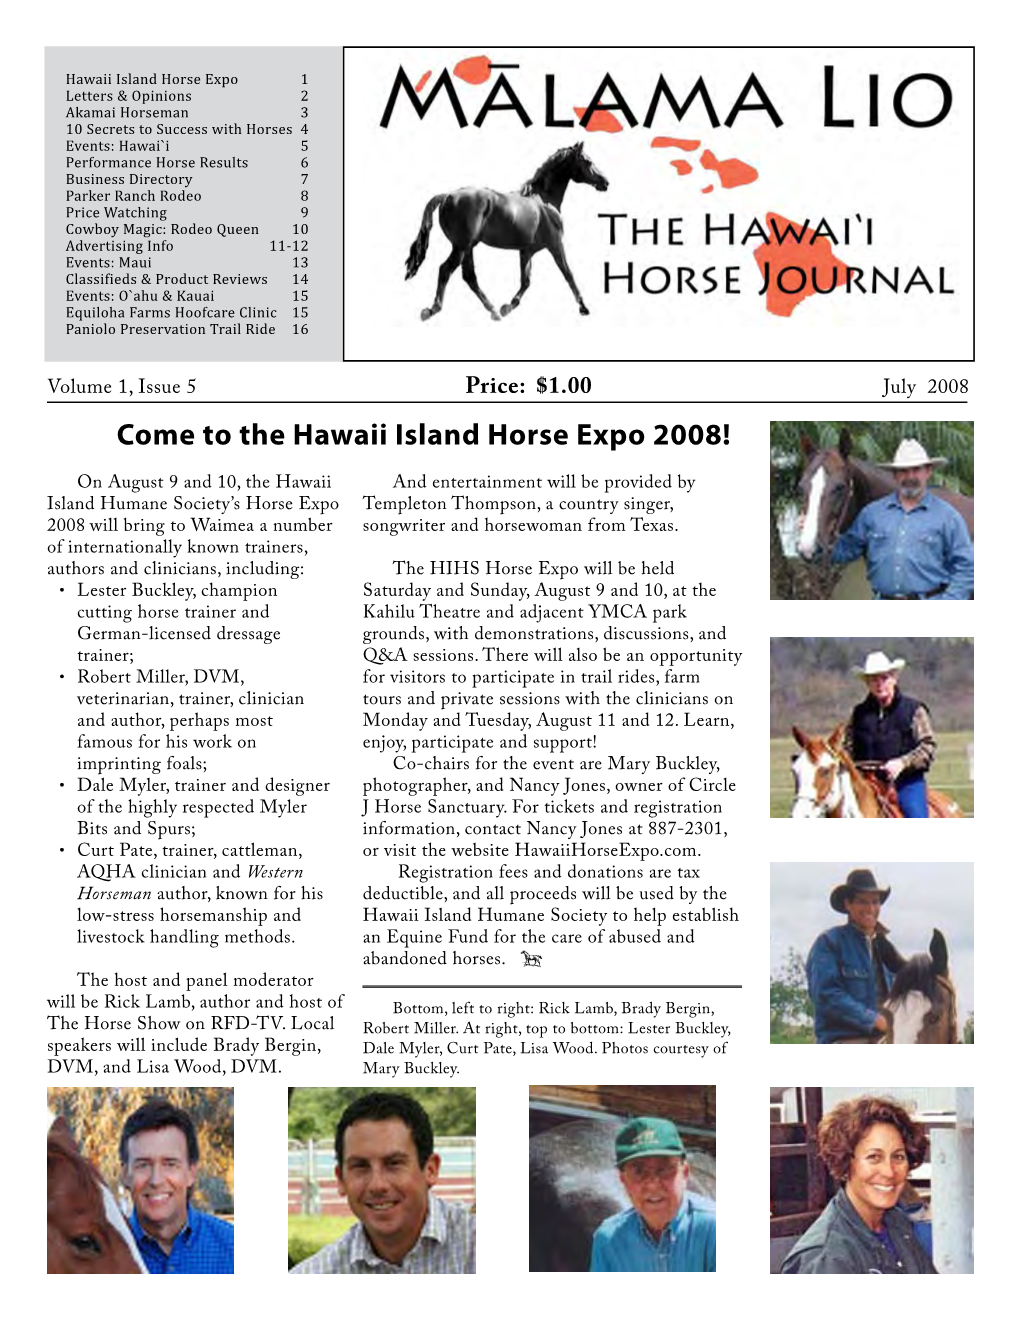 Come to the Hawaii Island Horse Expo 2008!